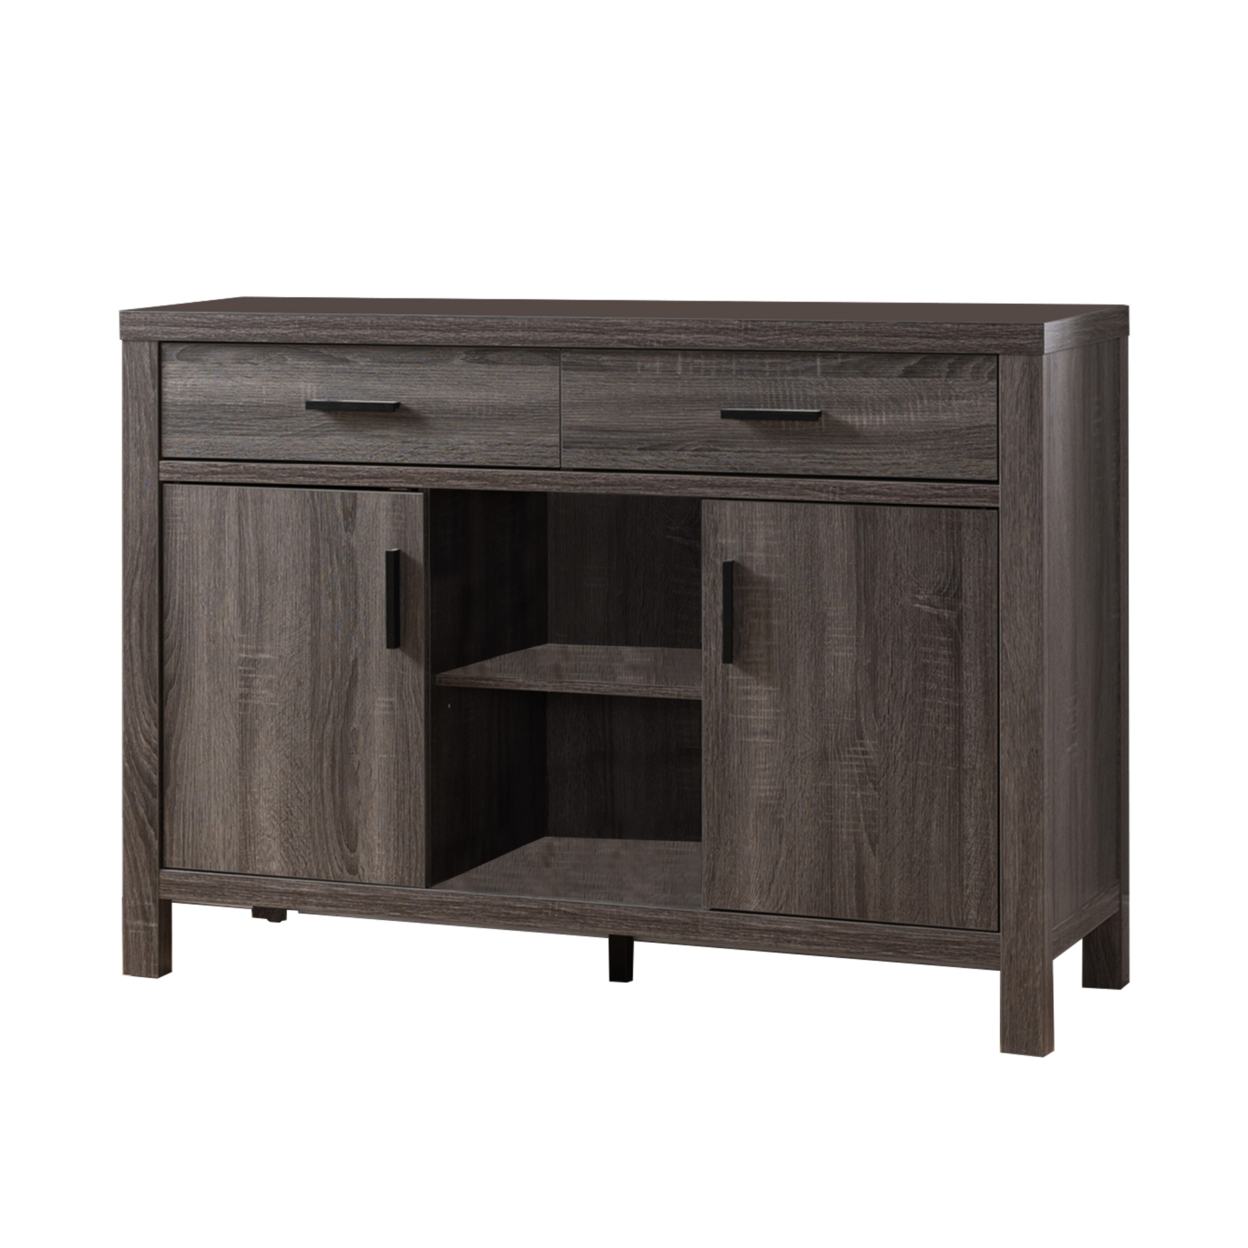 Wooden Buffet With 2 Drawers And 2 Door Cabinets, Distressed Gray- Saltoro Sherpi